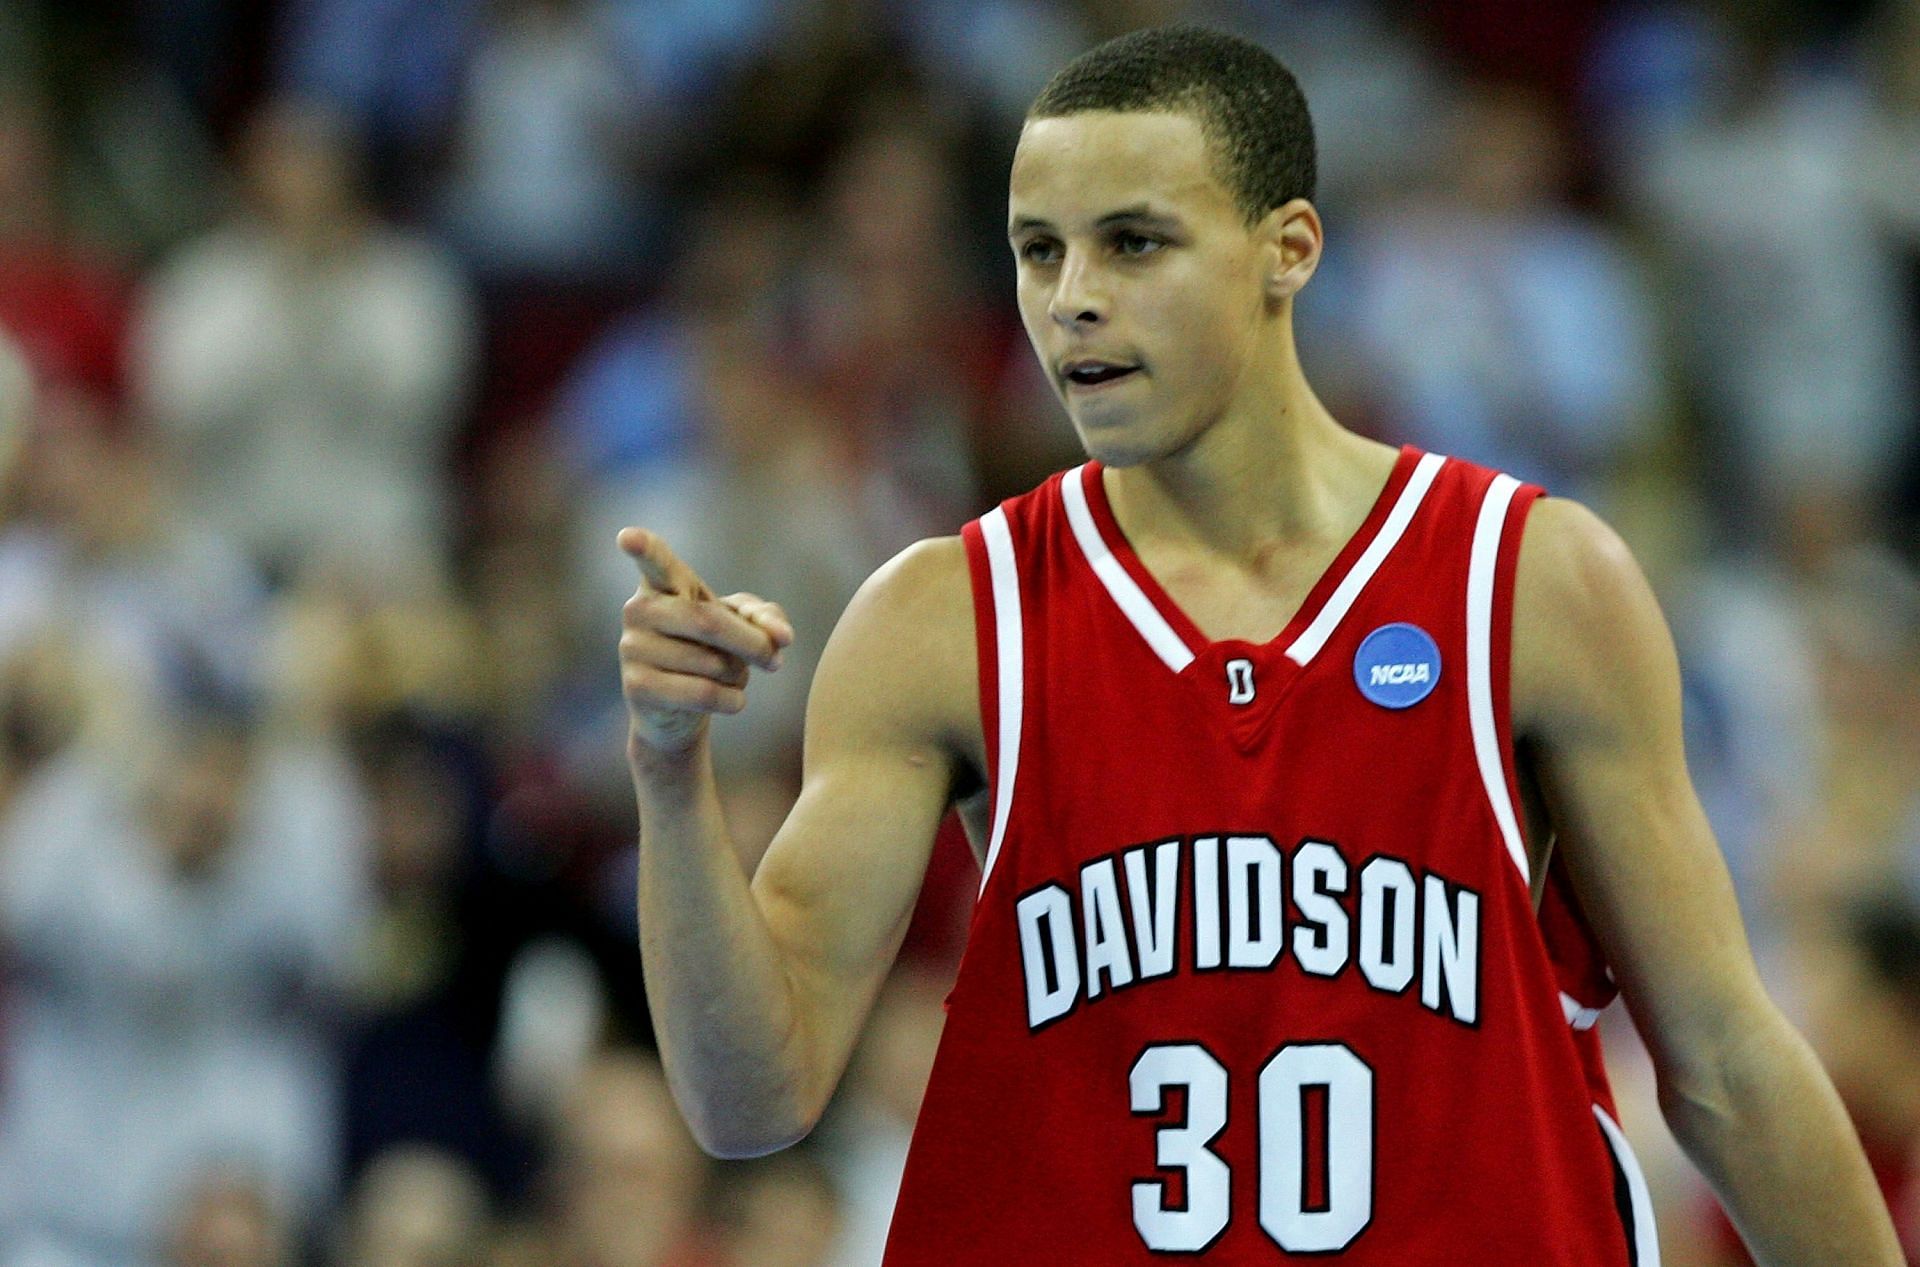 How good was Stephen Curry in NCAA basketball? Here's a look at his